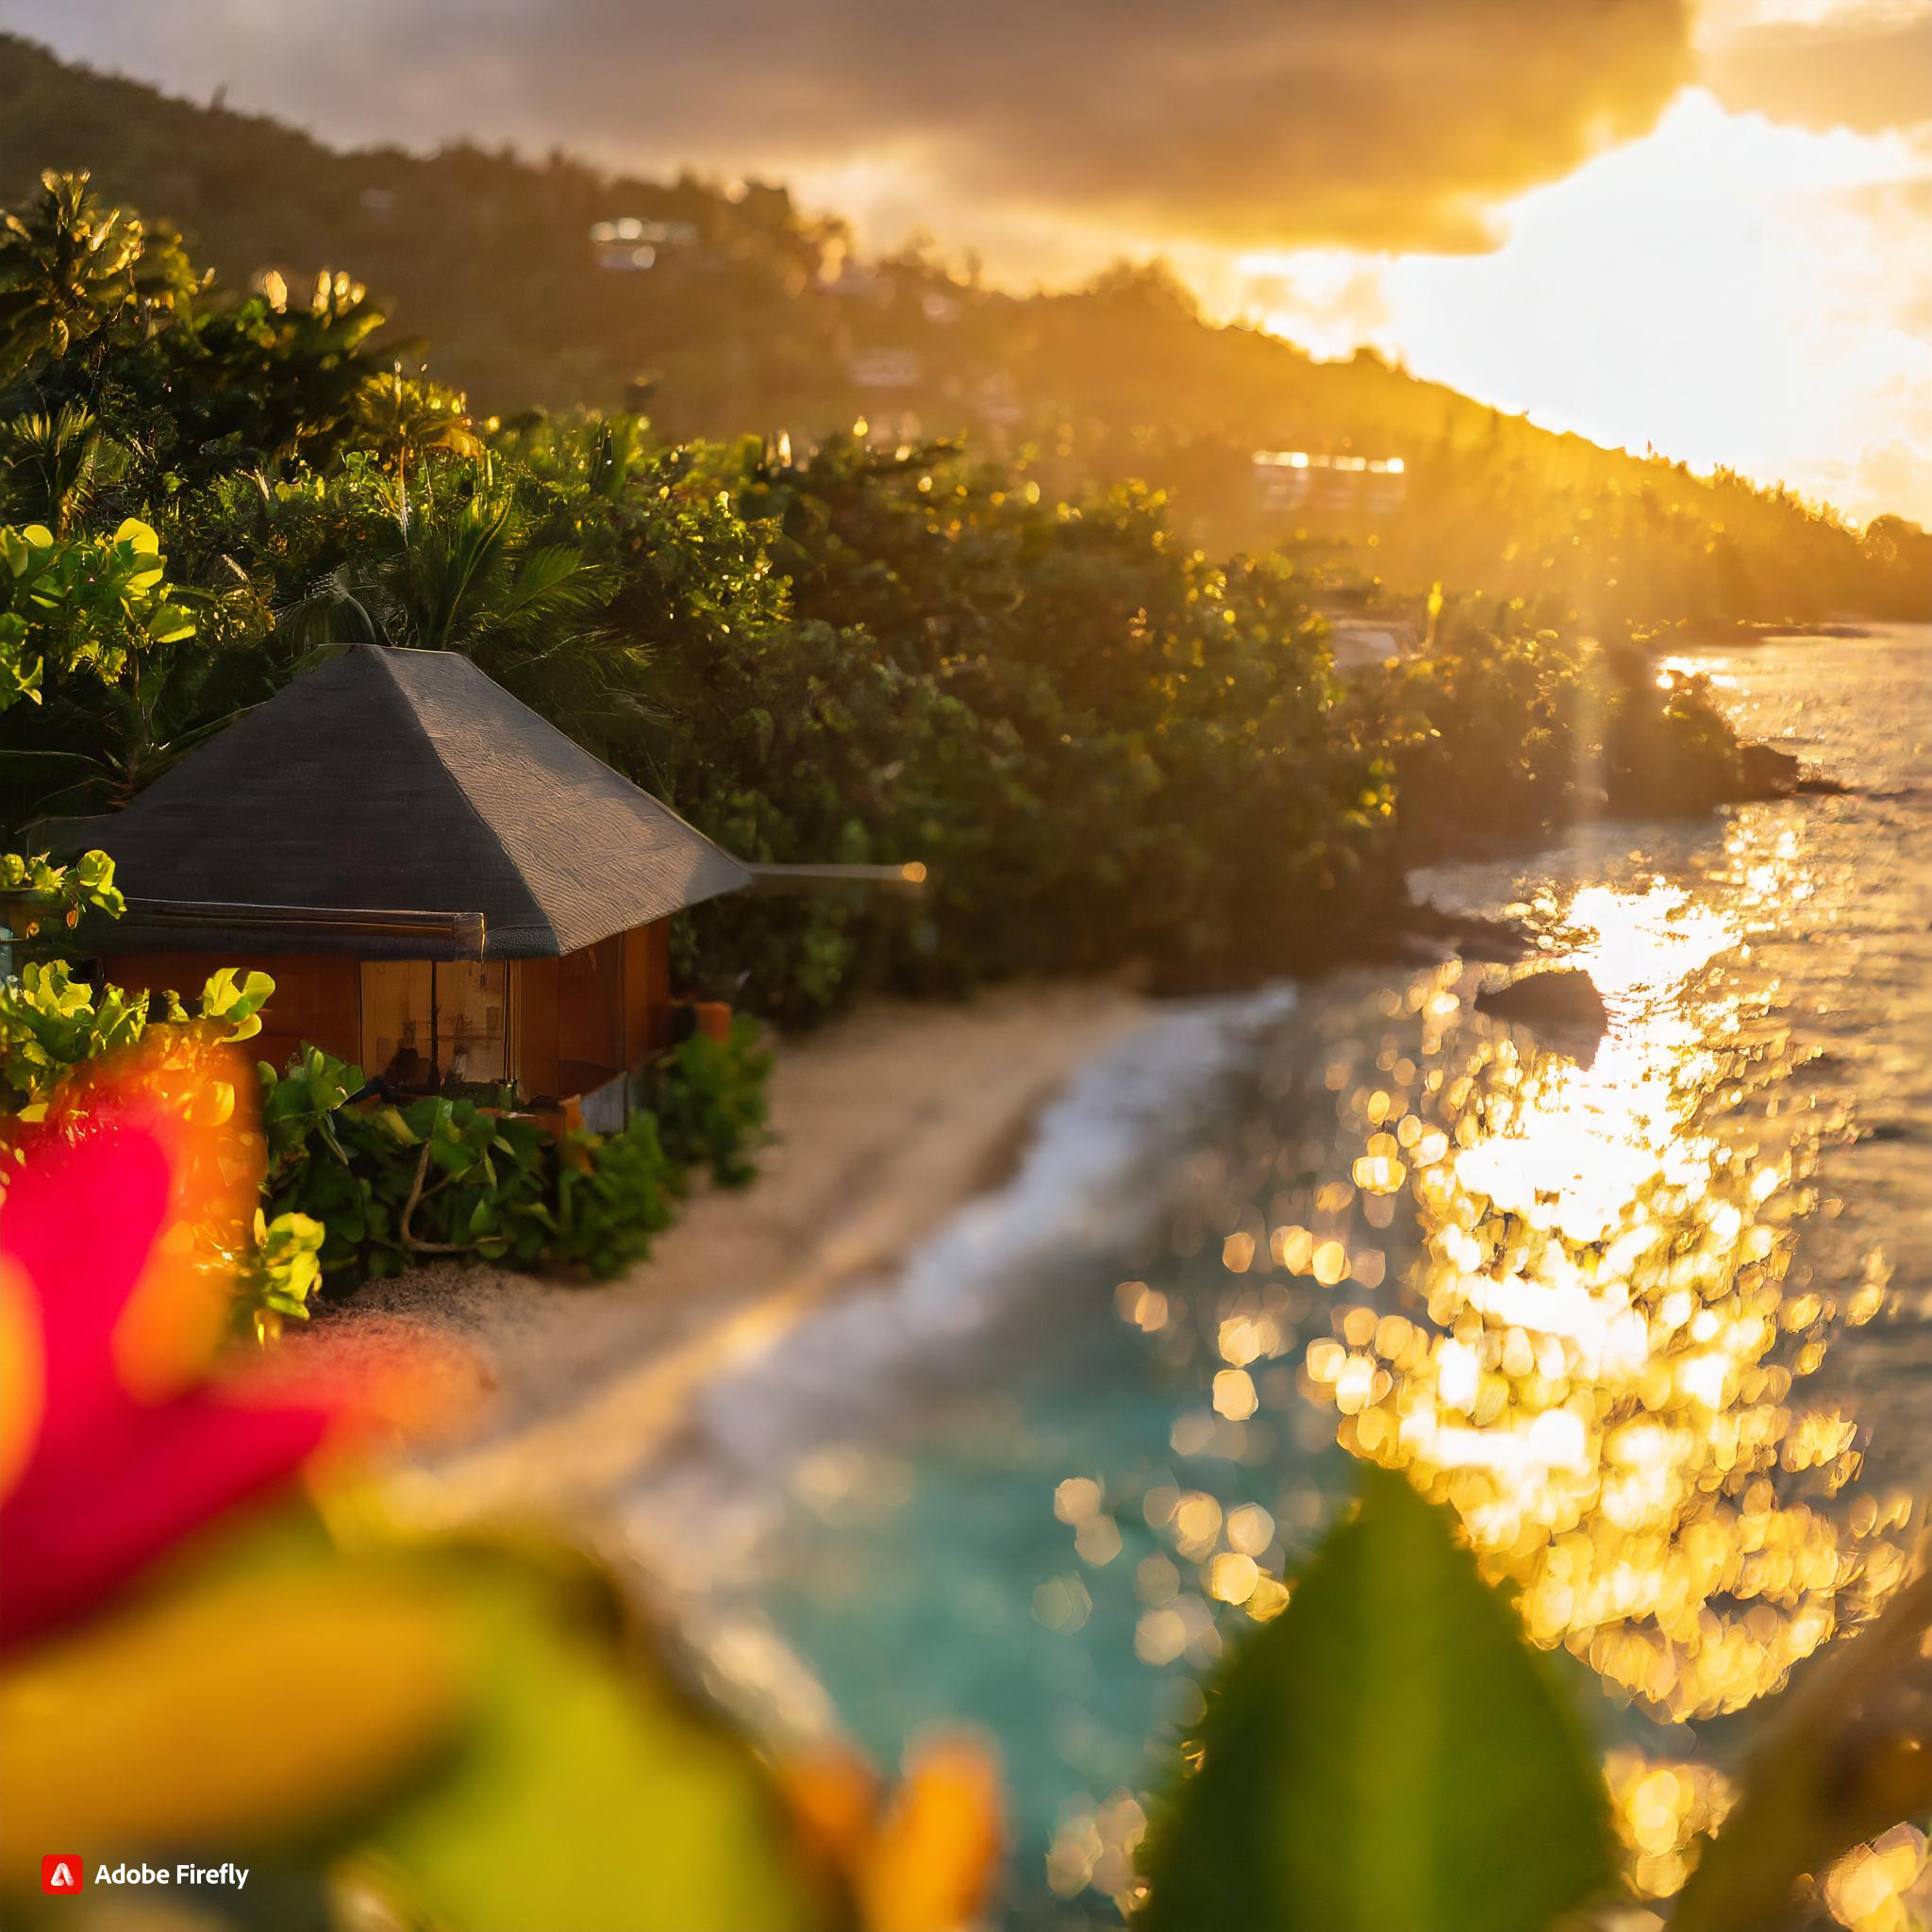 Firefly a beach house in seychelles overlooking the pristine ocean and vibrant flora and fauna